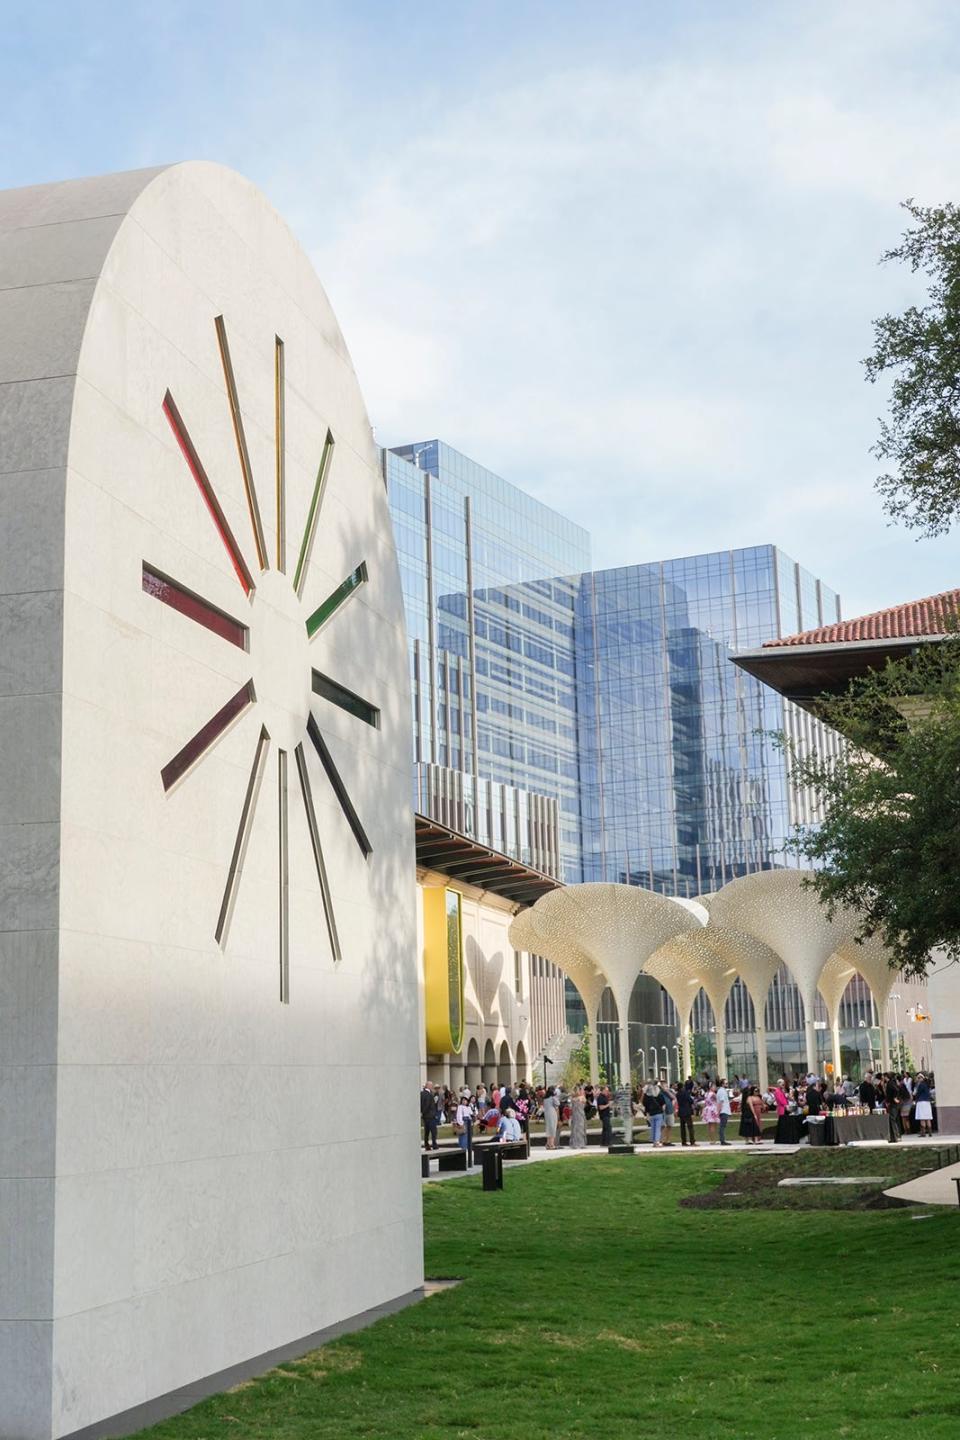 Visitors can now walk all the way around Ellsworth Kelly's "Austin."